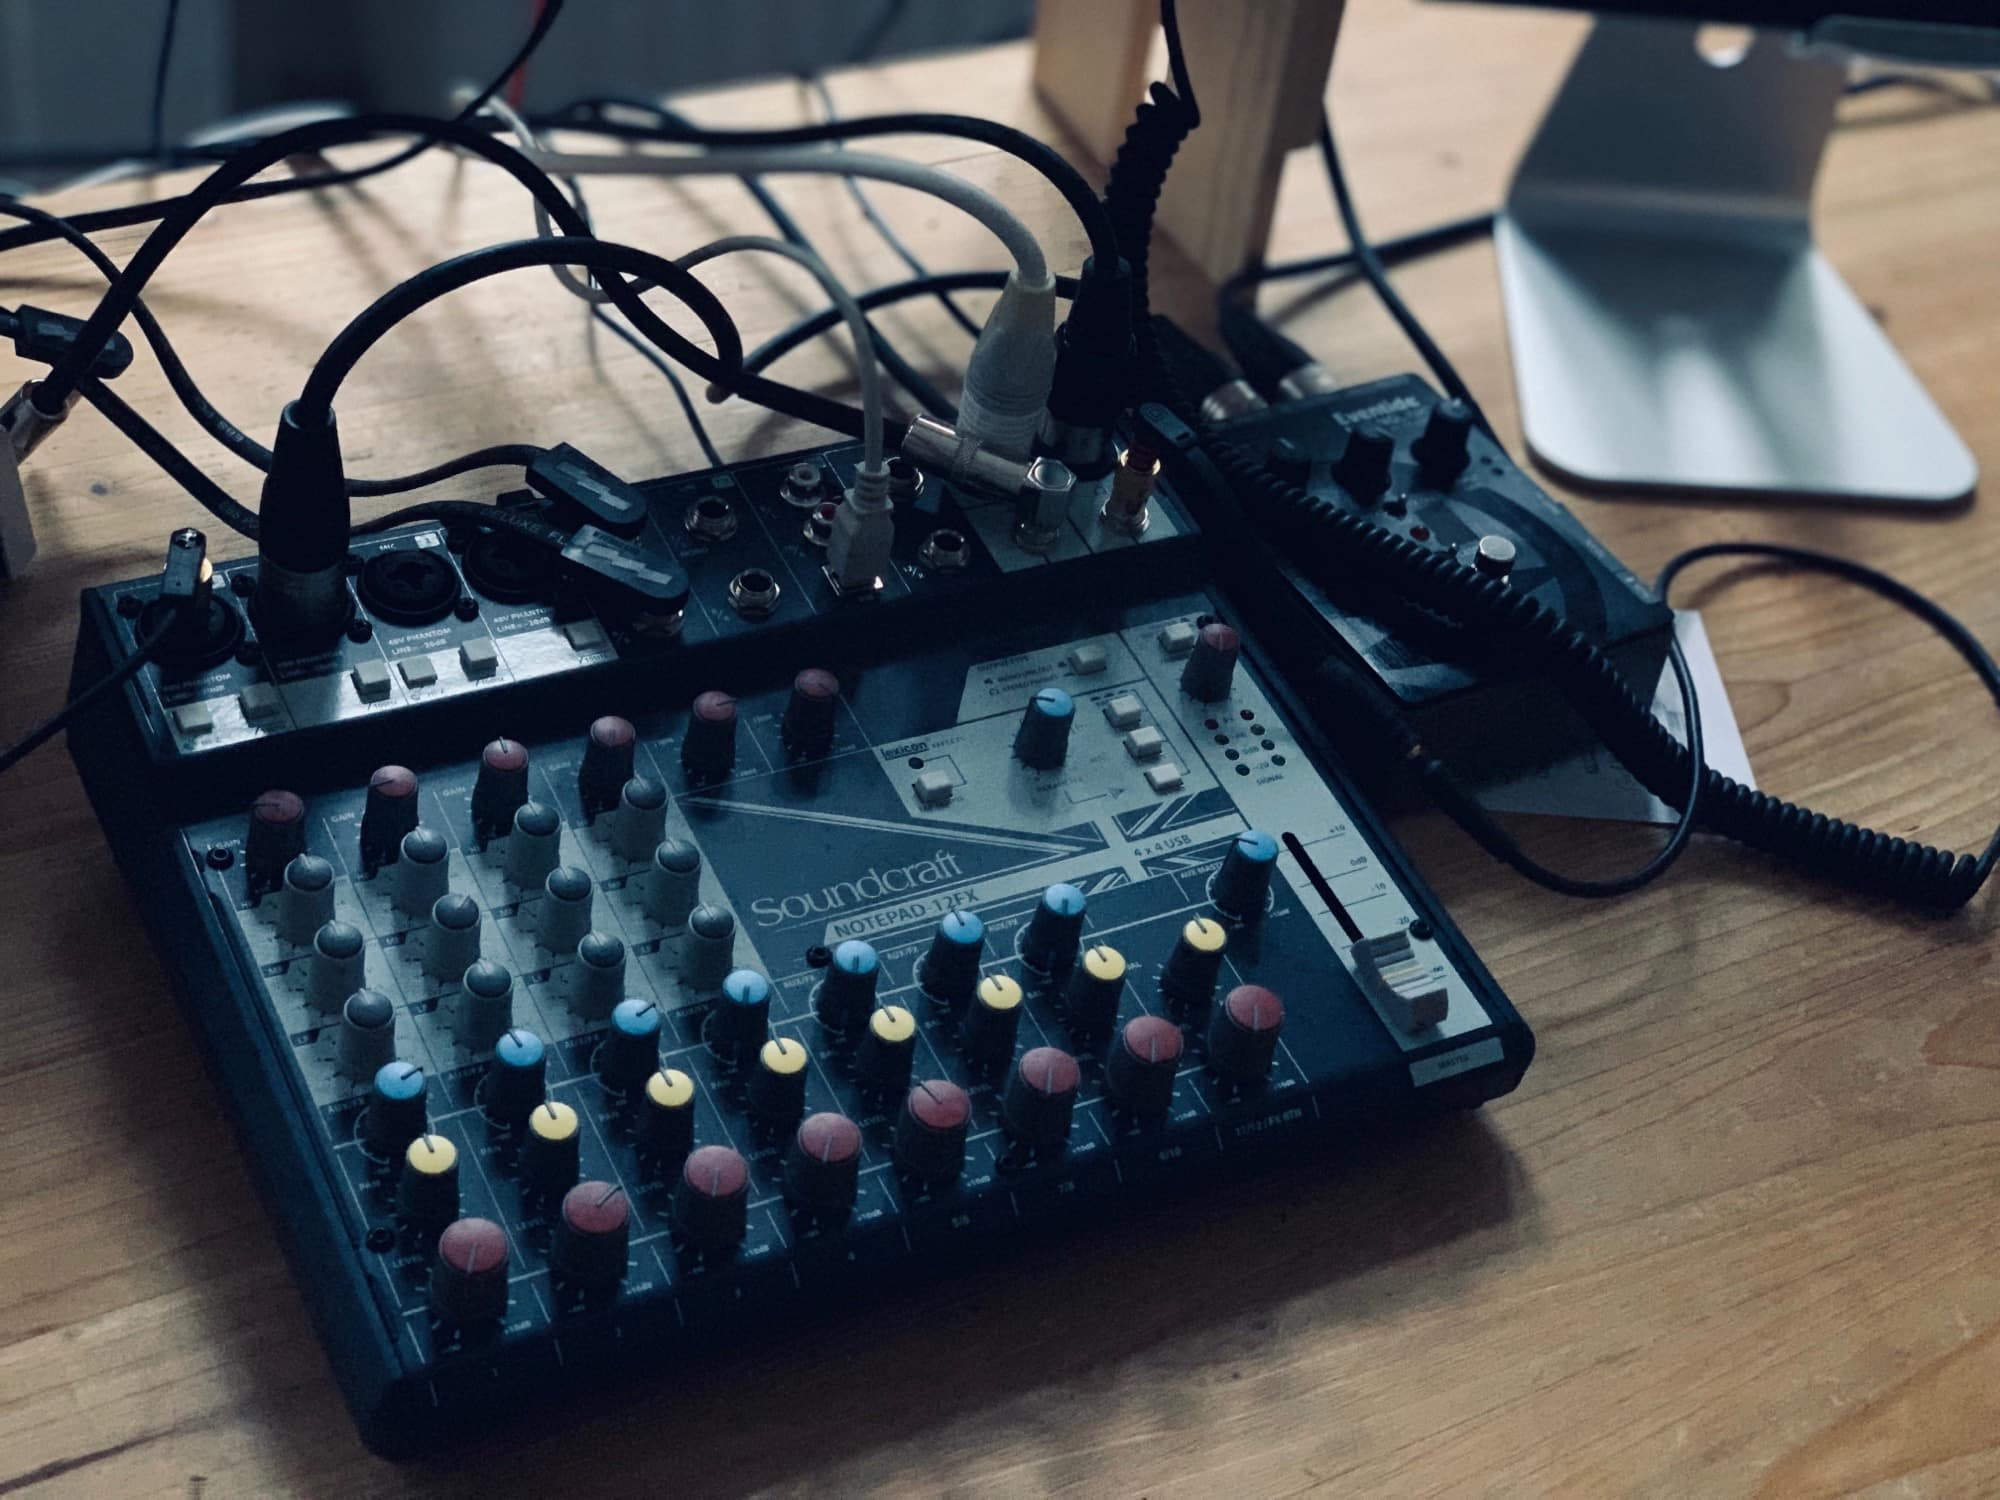 You don’t need a fancy mixer. Any old USB audio interface will do.